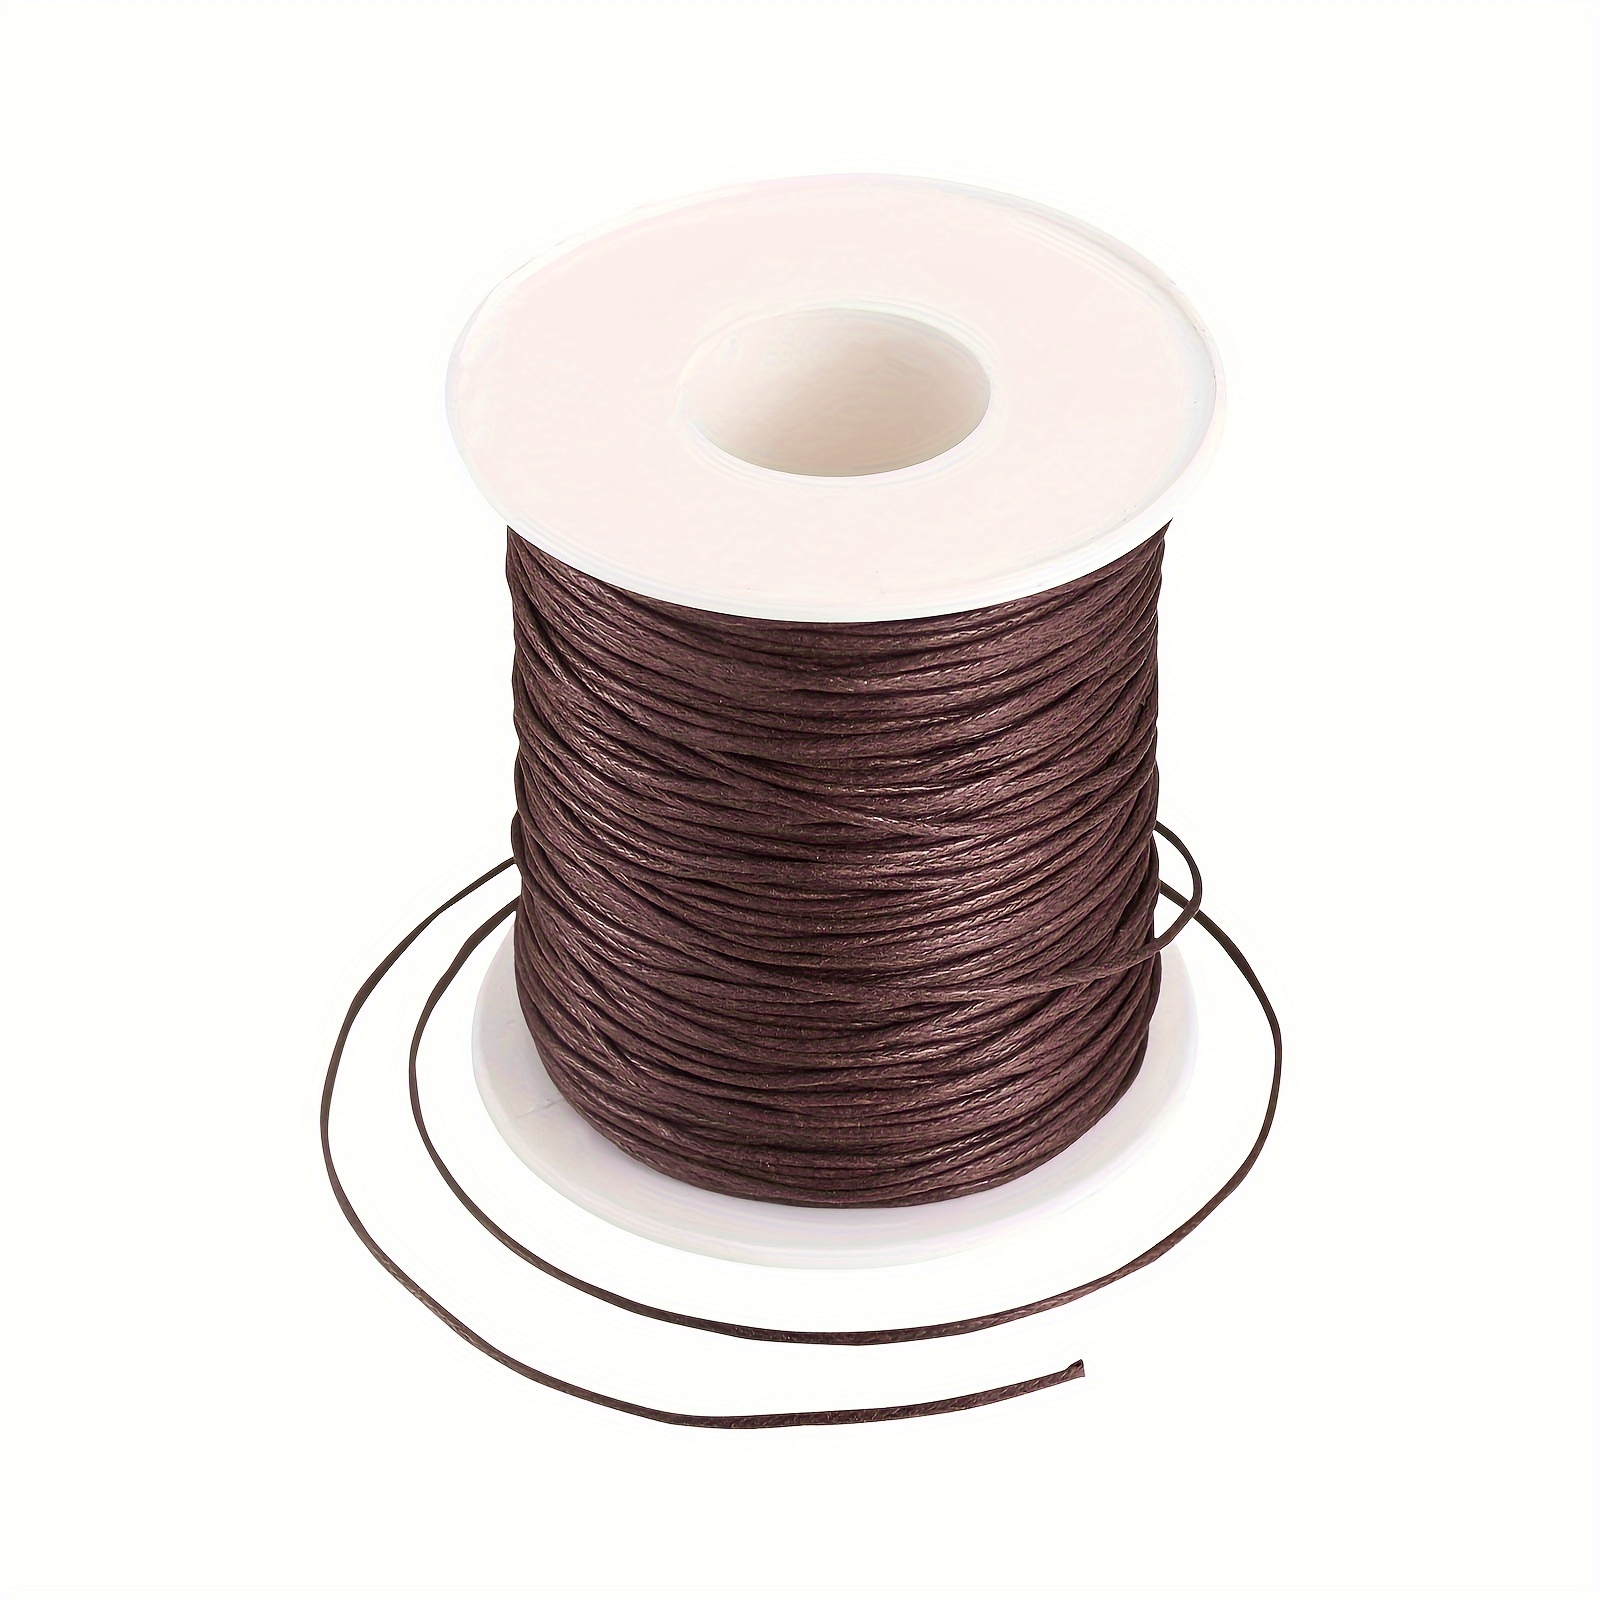 100 Yards Waxed Cord Cotton Waxed Cotton Thread 1mm Waxed Beading String  Cord for Jewelry Bracelet Making Macrame Crafting DIY Leather - Light